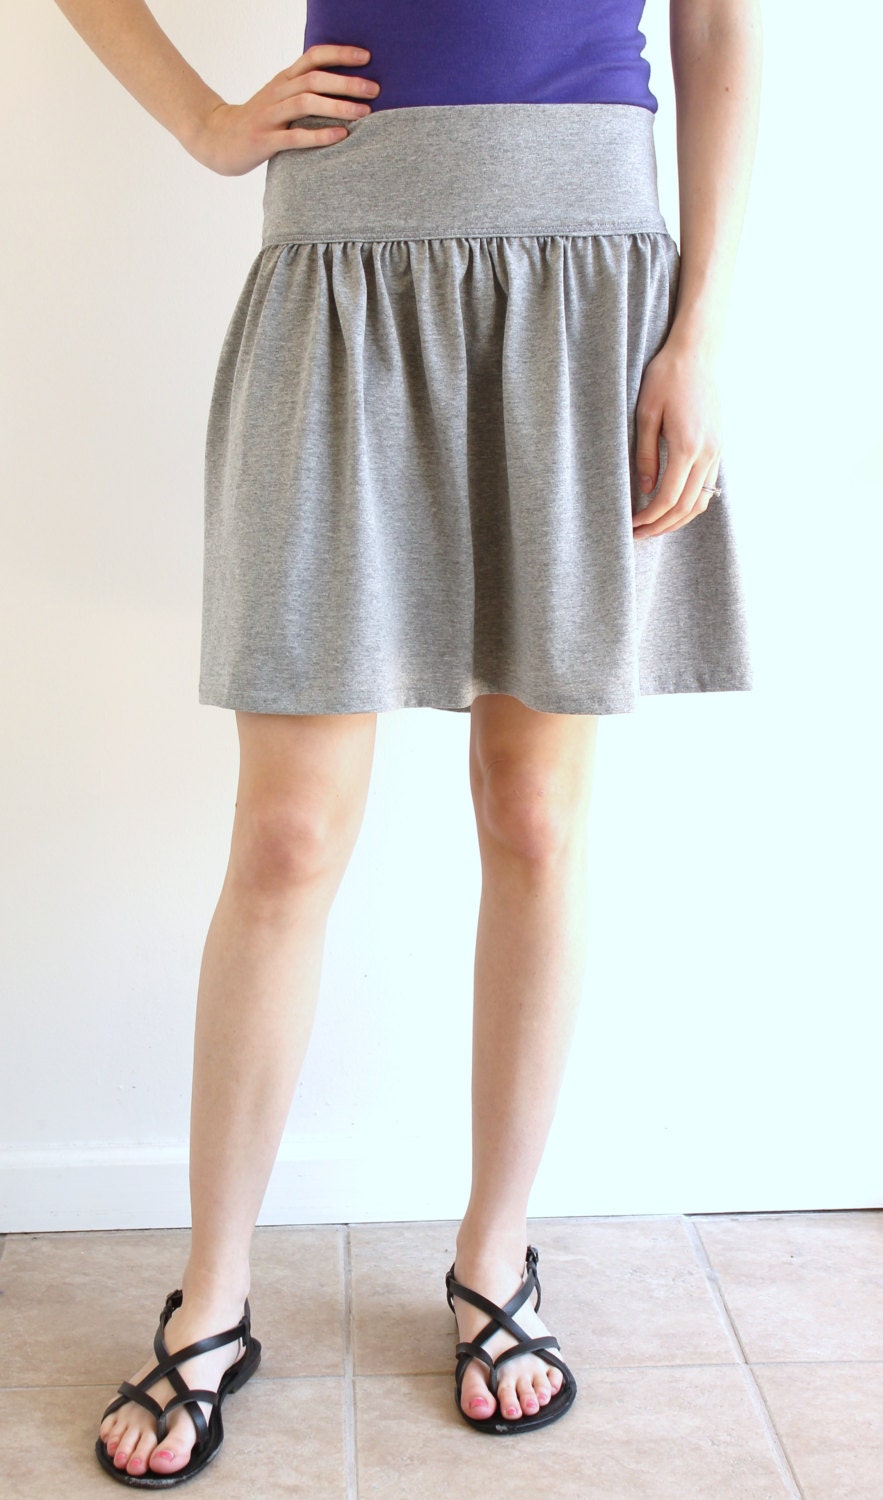 Women's Knee Length Skirt with Yoga Style Waist by ThreadsbyEmily